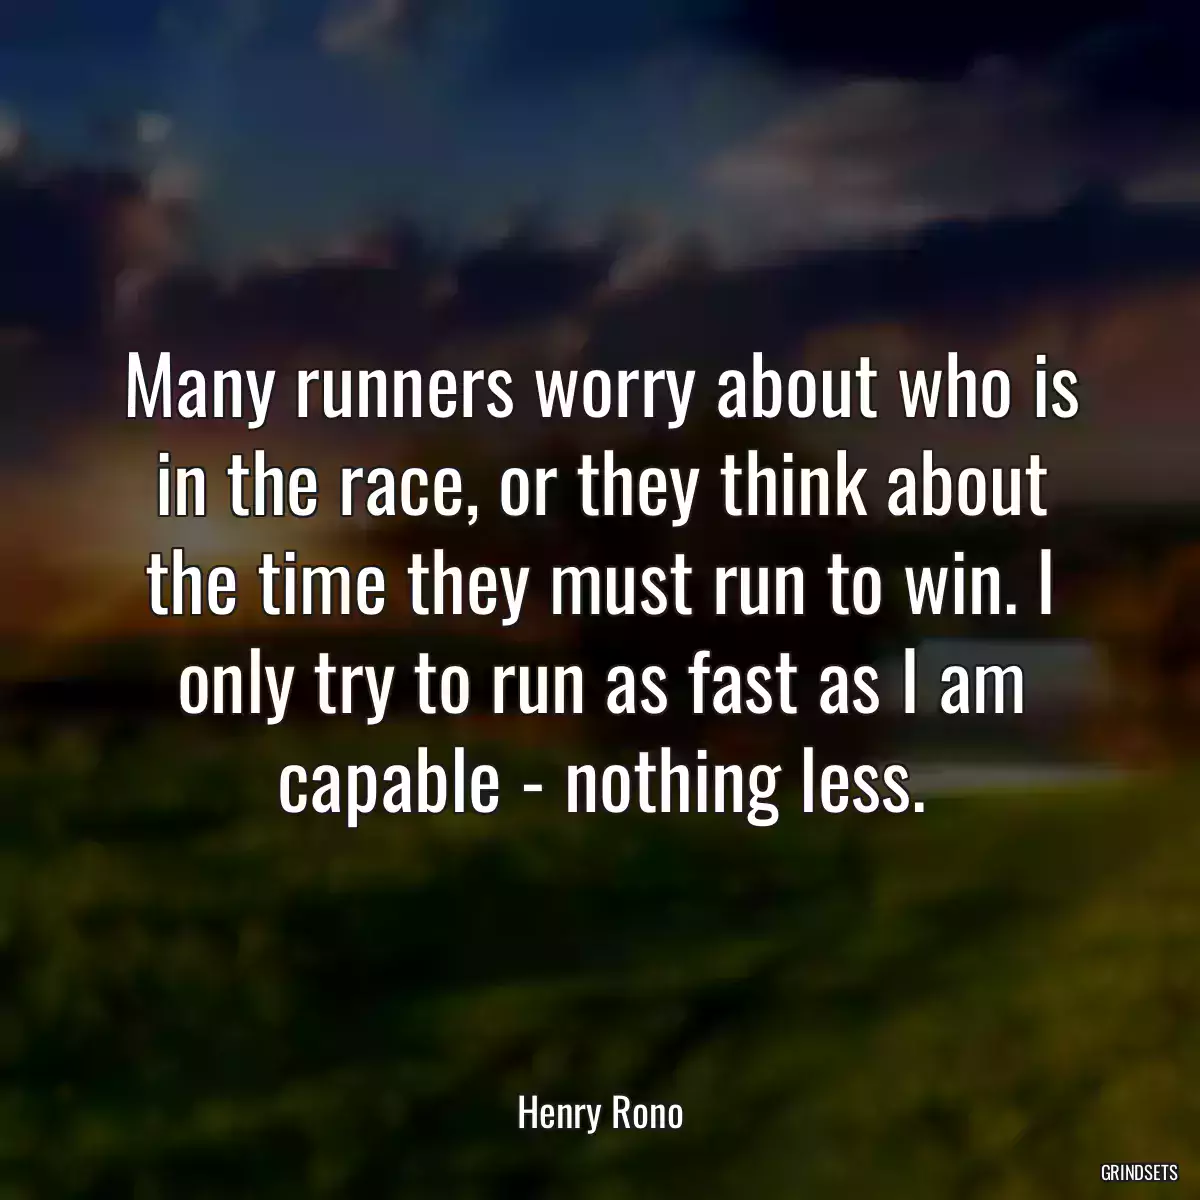 Many runners worry about who is in the race, or they think about the time they must run to win. I only try to run as fast as I am capable - nothing less.